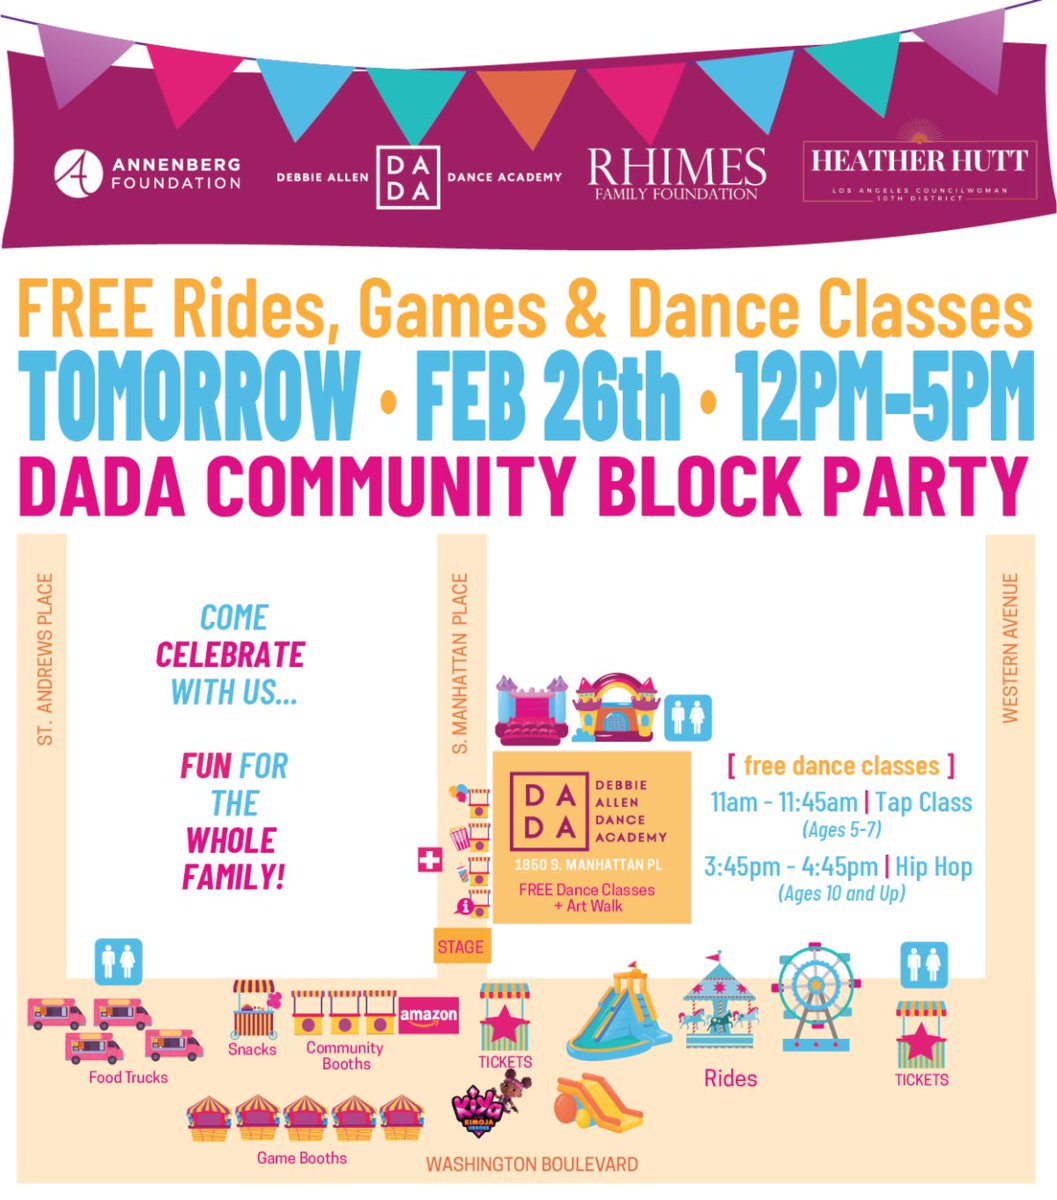 This looks like super fun, Angelenos. Dancing, Hair, Rides and Roy Choi at the Dada Block Party.